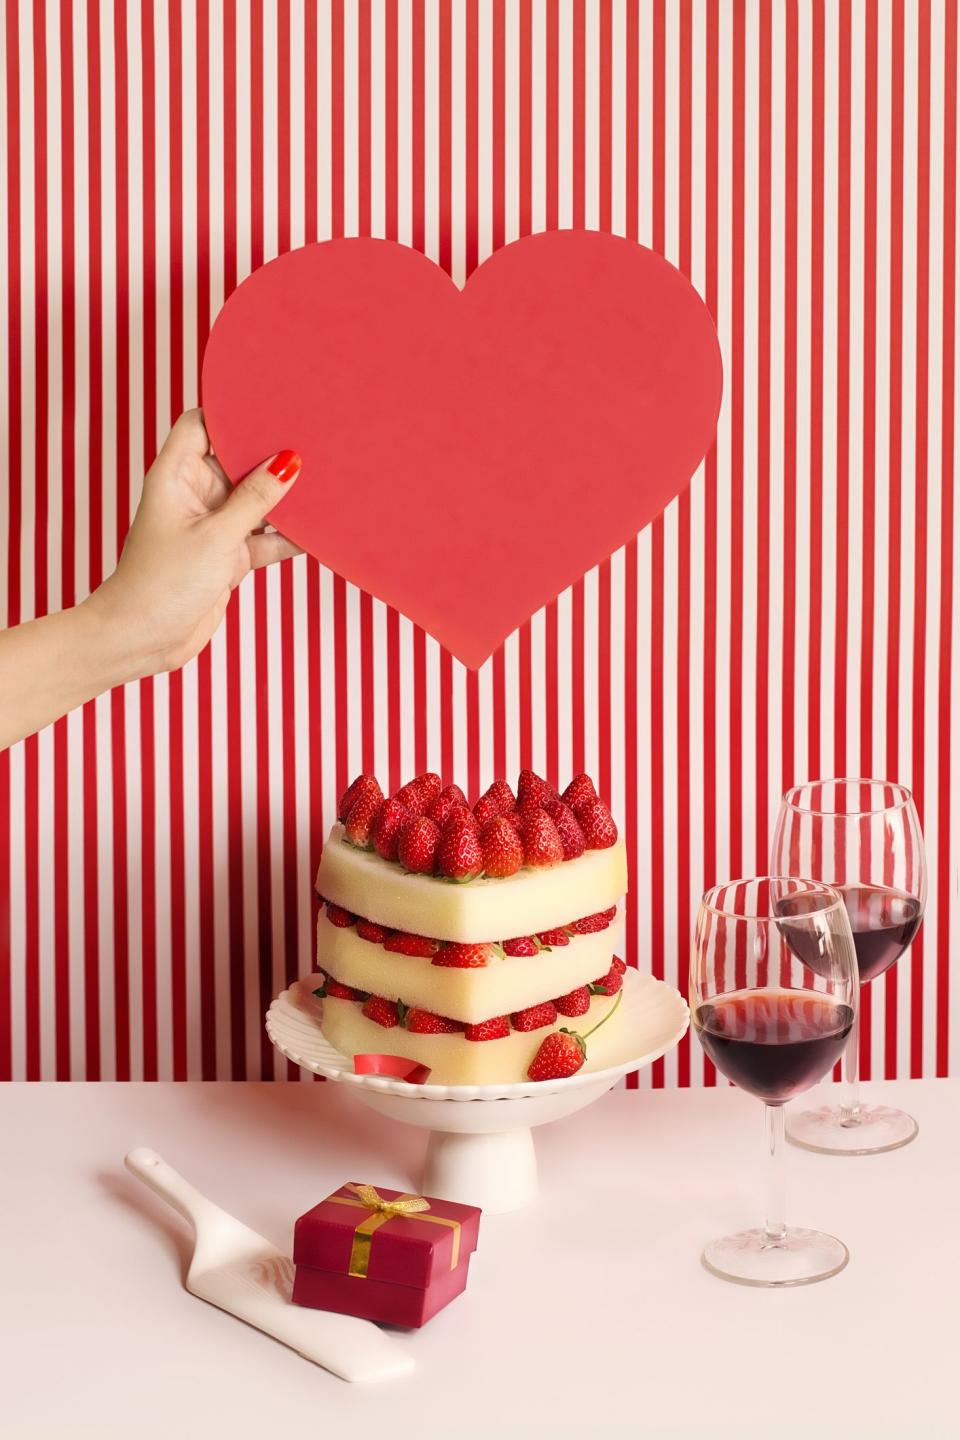 30 Best Valentine’s Day Party Ideas to Celebrate Love